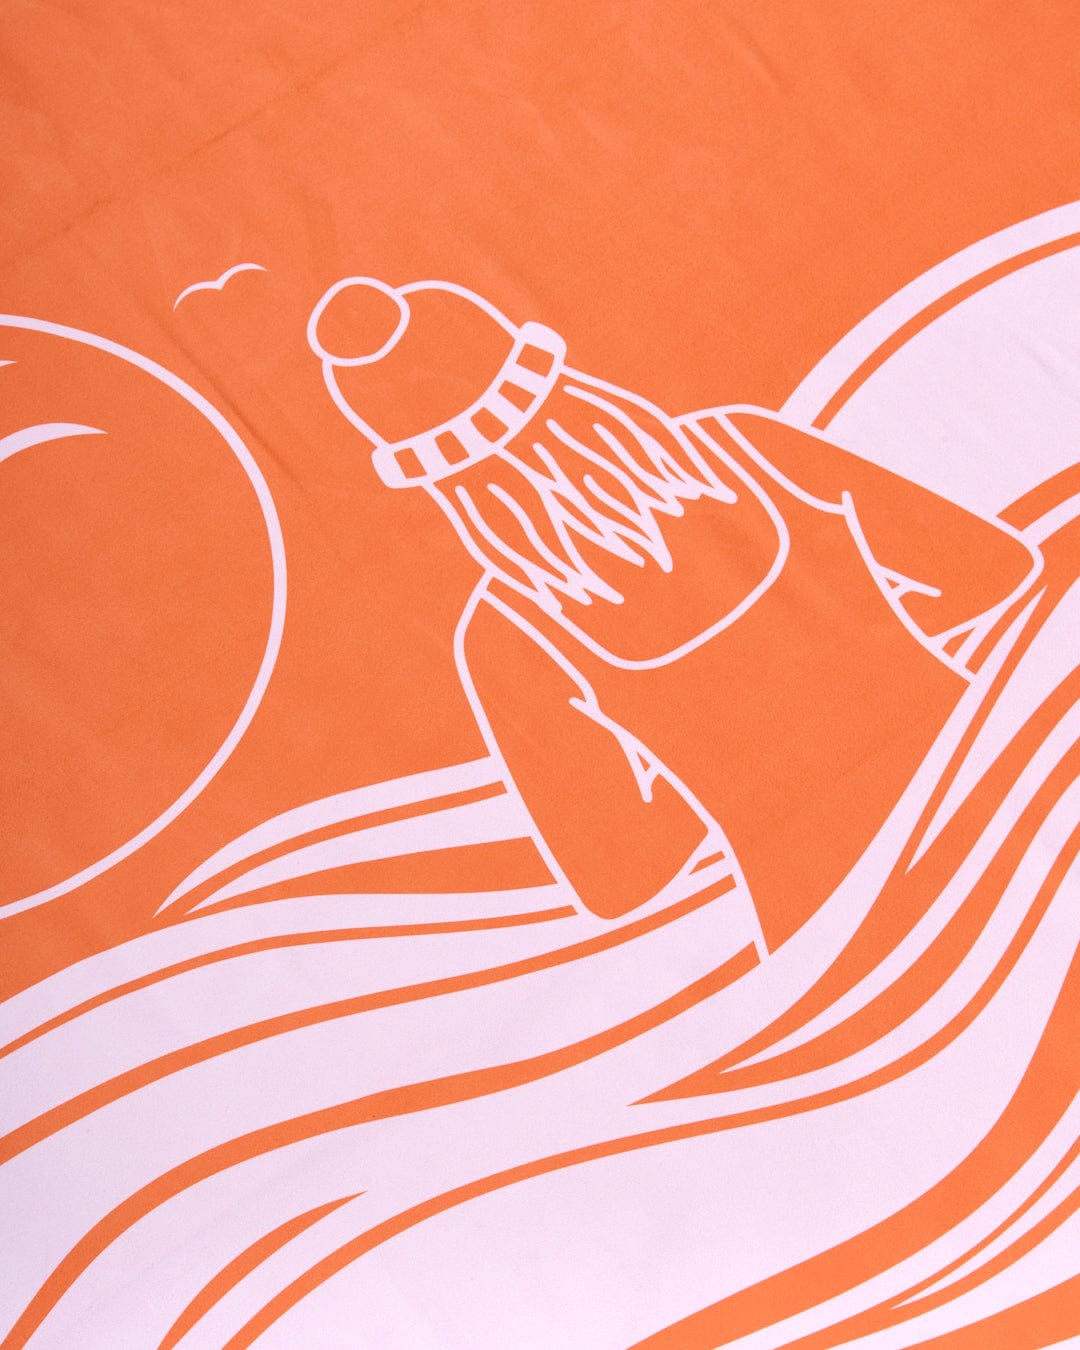 An absorbent Saltrock orange towel with a drawing of a woman riding a surfboard.